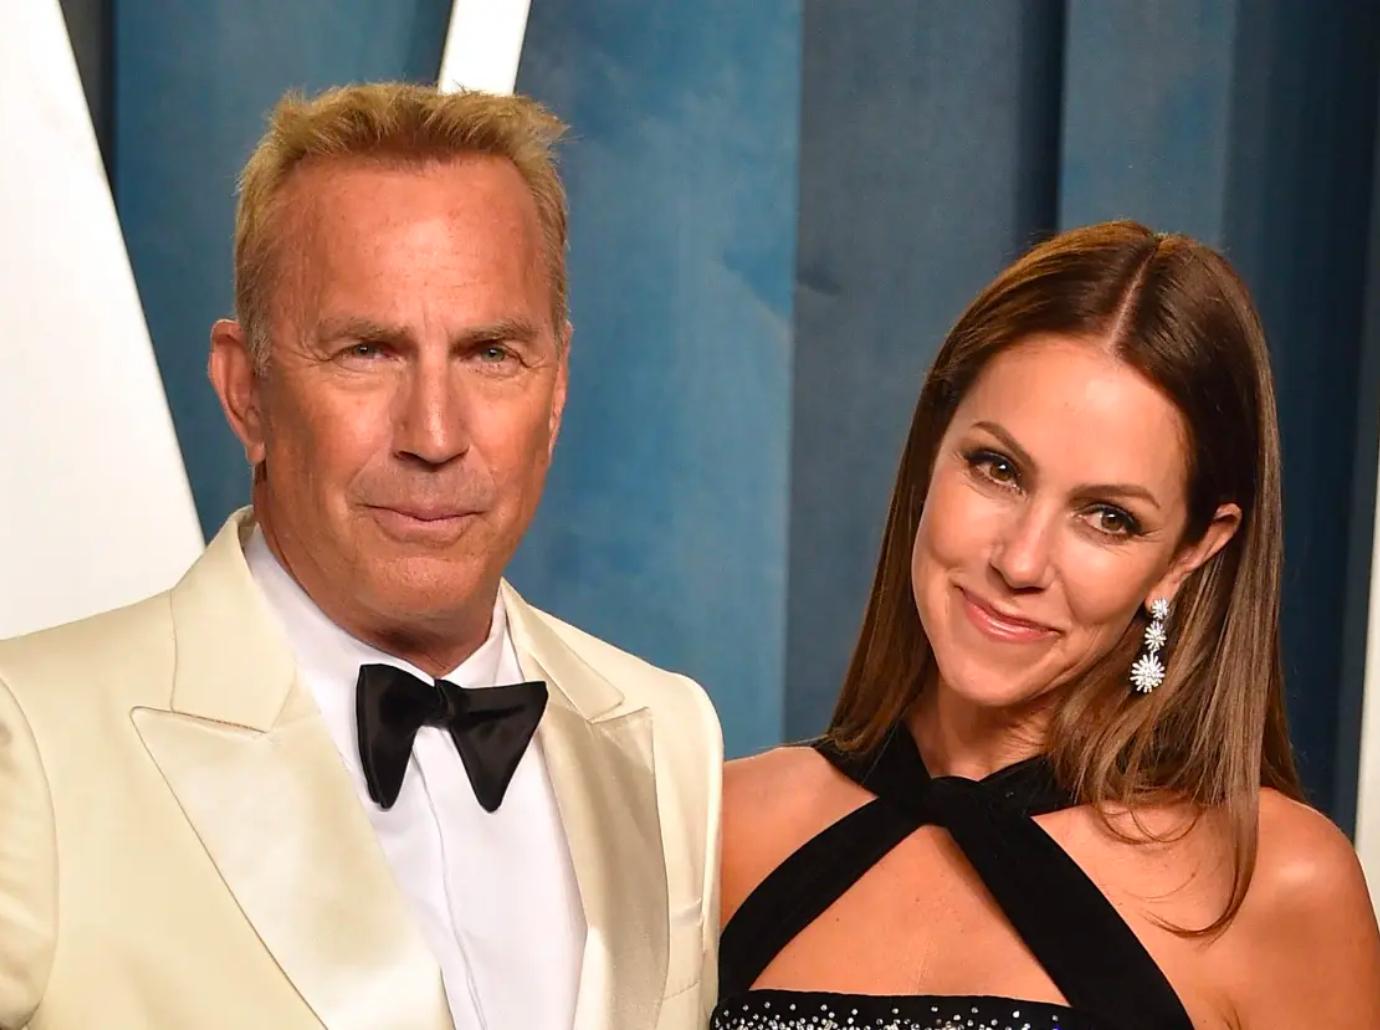 Kevin costner's estranged wife 'refuses to vacate' home after divorce